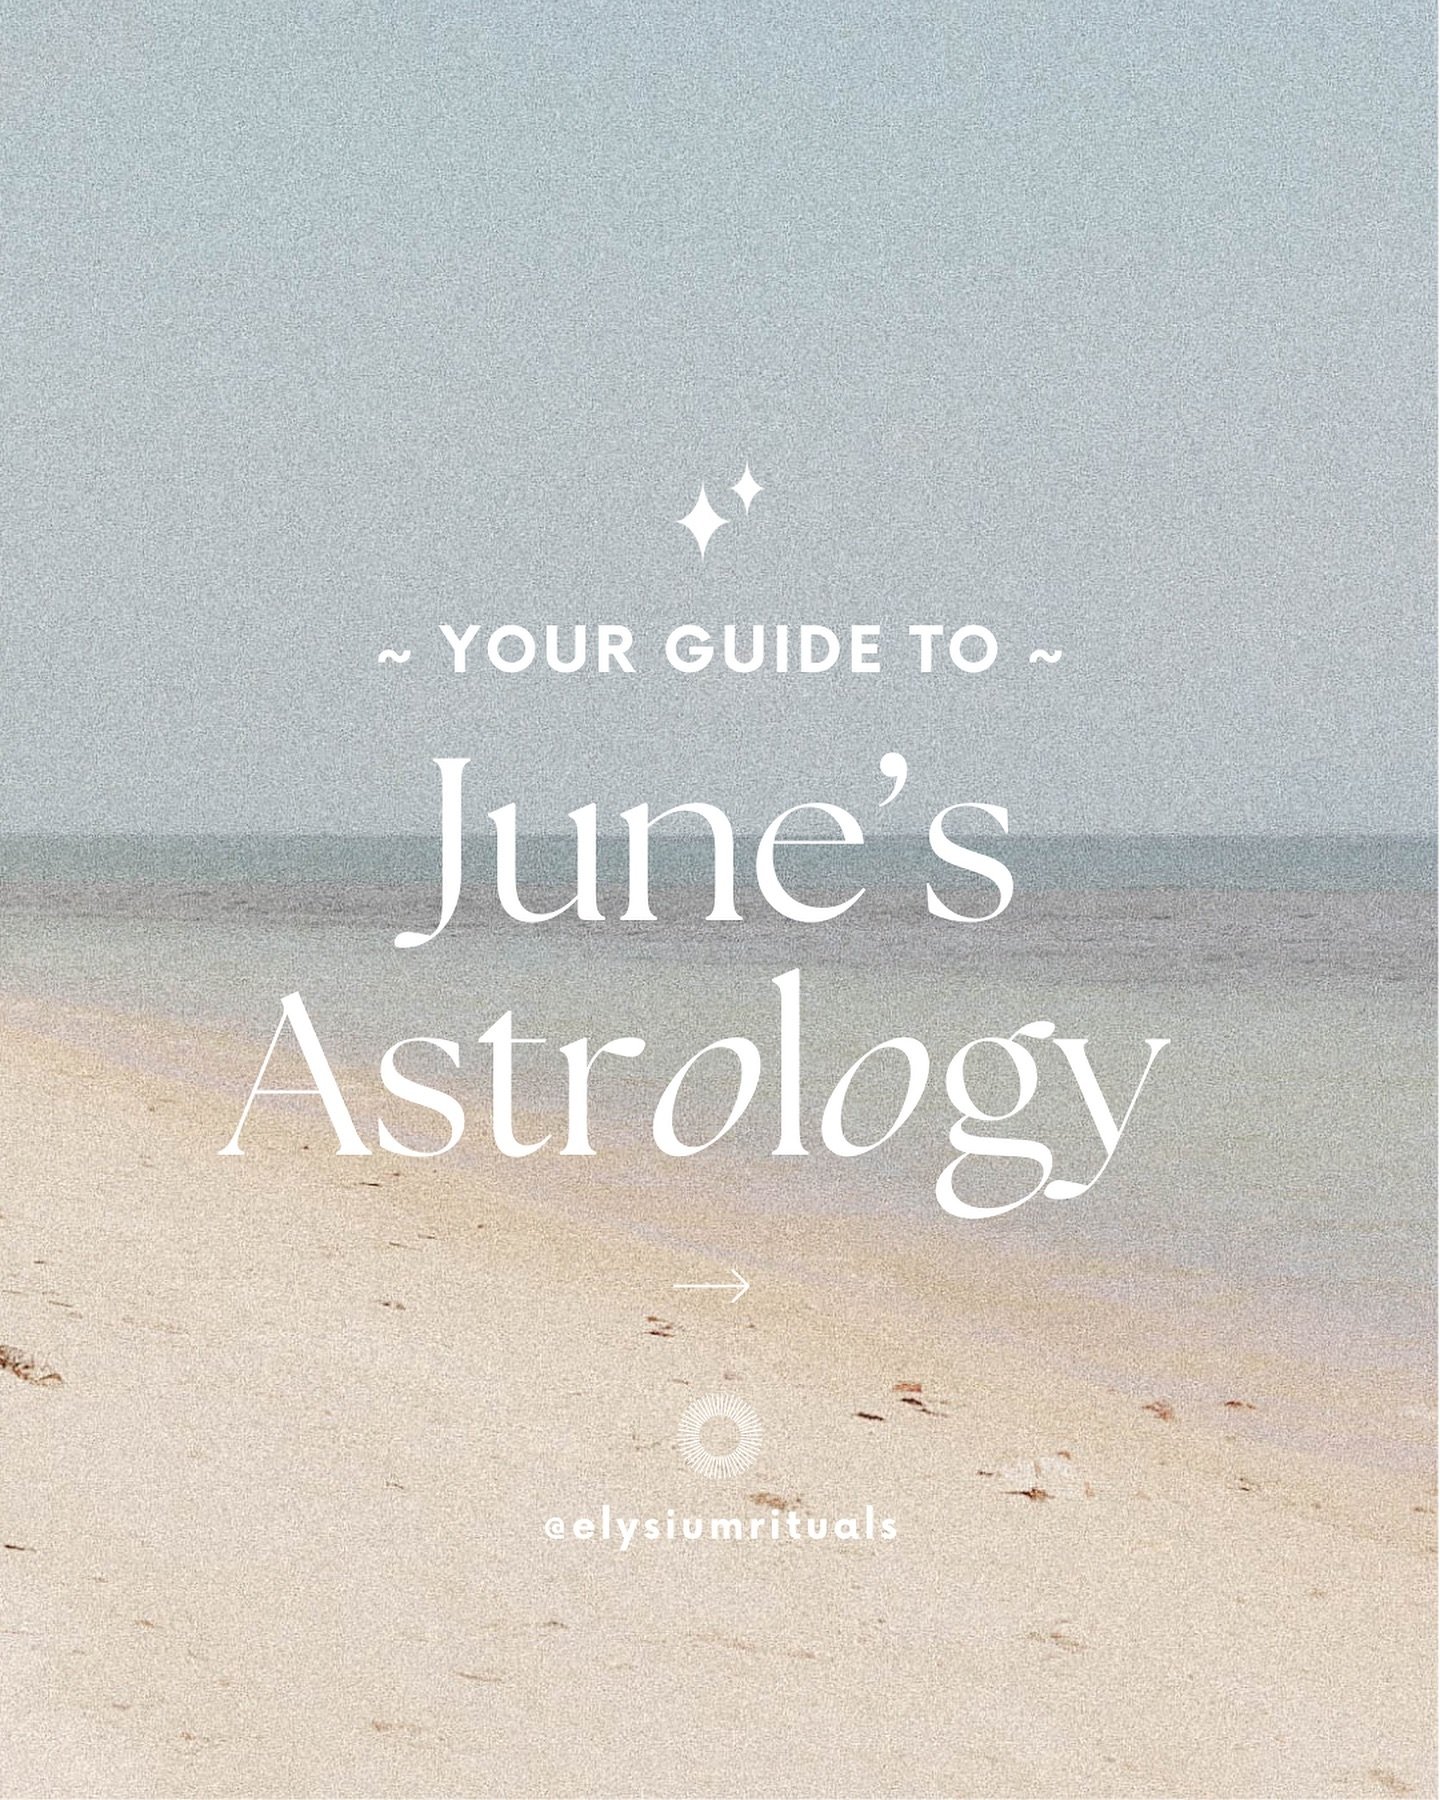 JUNE ASTRO FORECAST:

We start this month with a collectively bolstering, empowering Jupiter-Pluto trine, envision the future you wish to see!

On the 8th + 9th Venus and then the Sun square Saturn which can feel harsh and depressing, with Mars squar